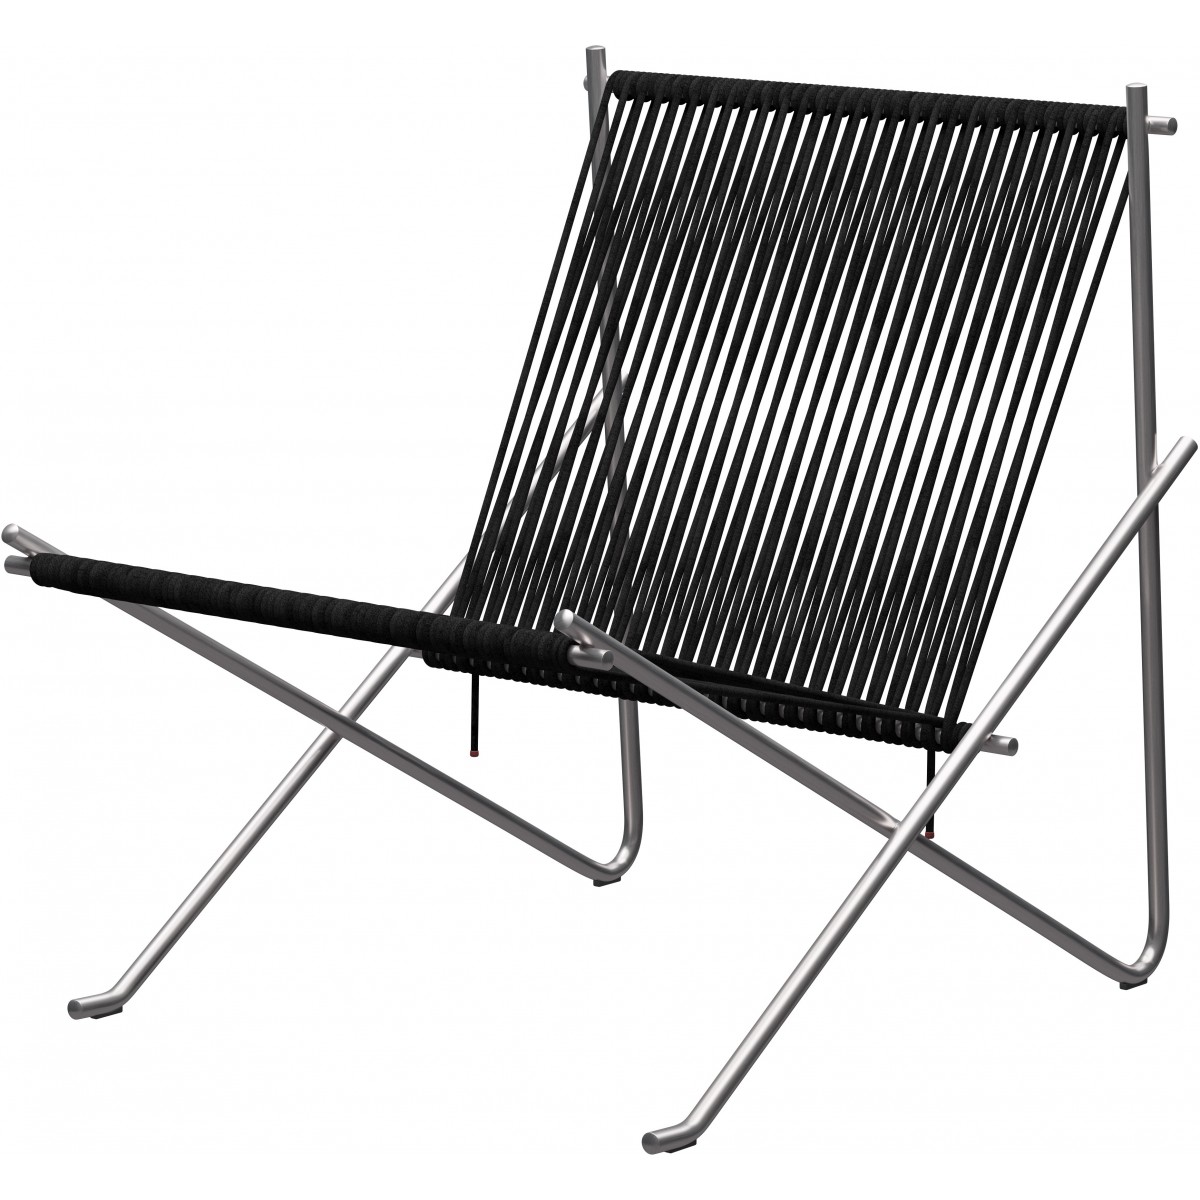 Lounge Brushed steel stainless – chair PK4 + Black